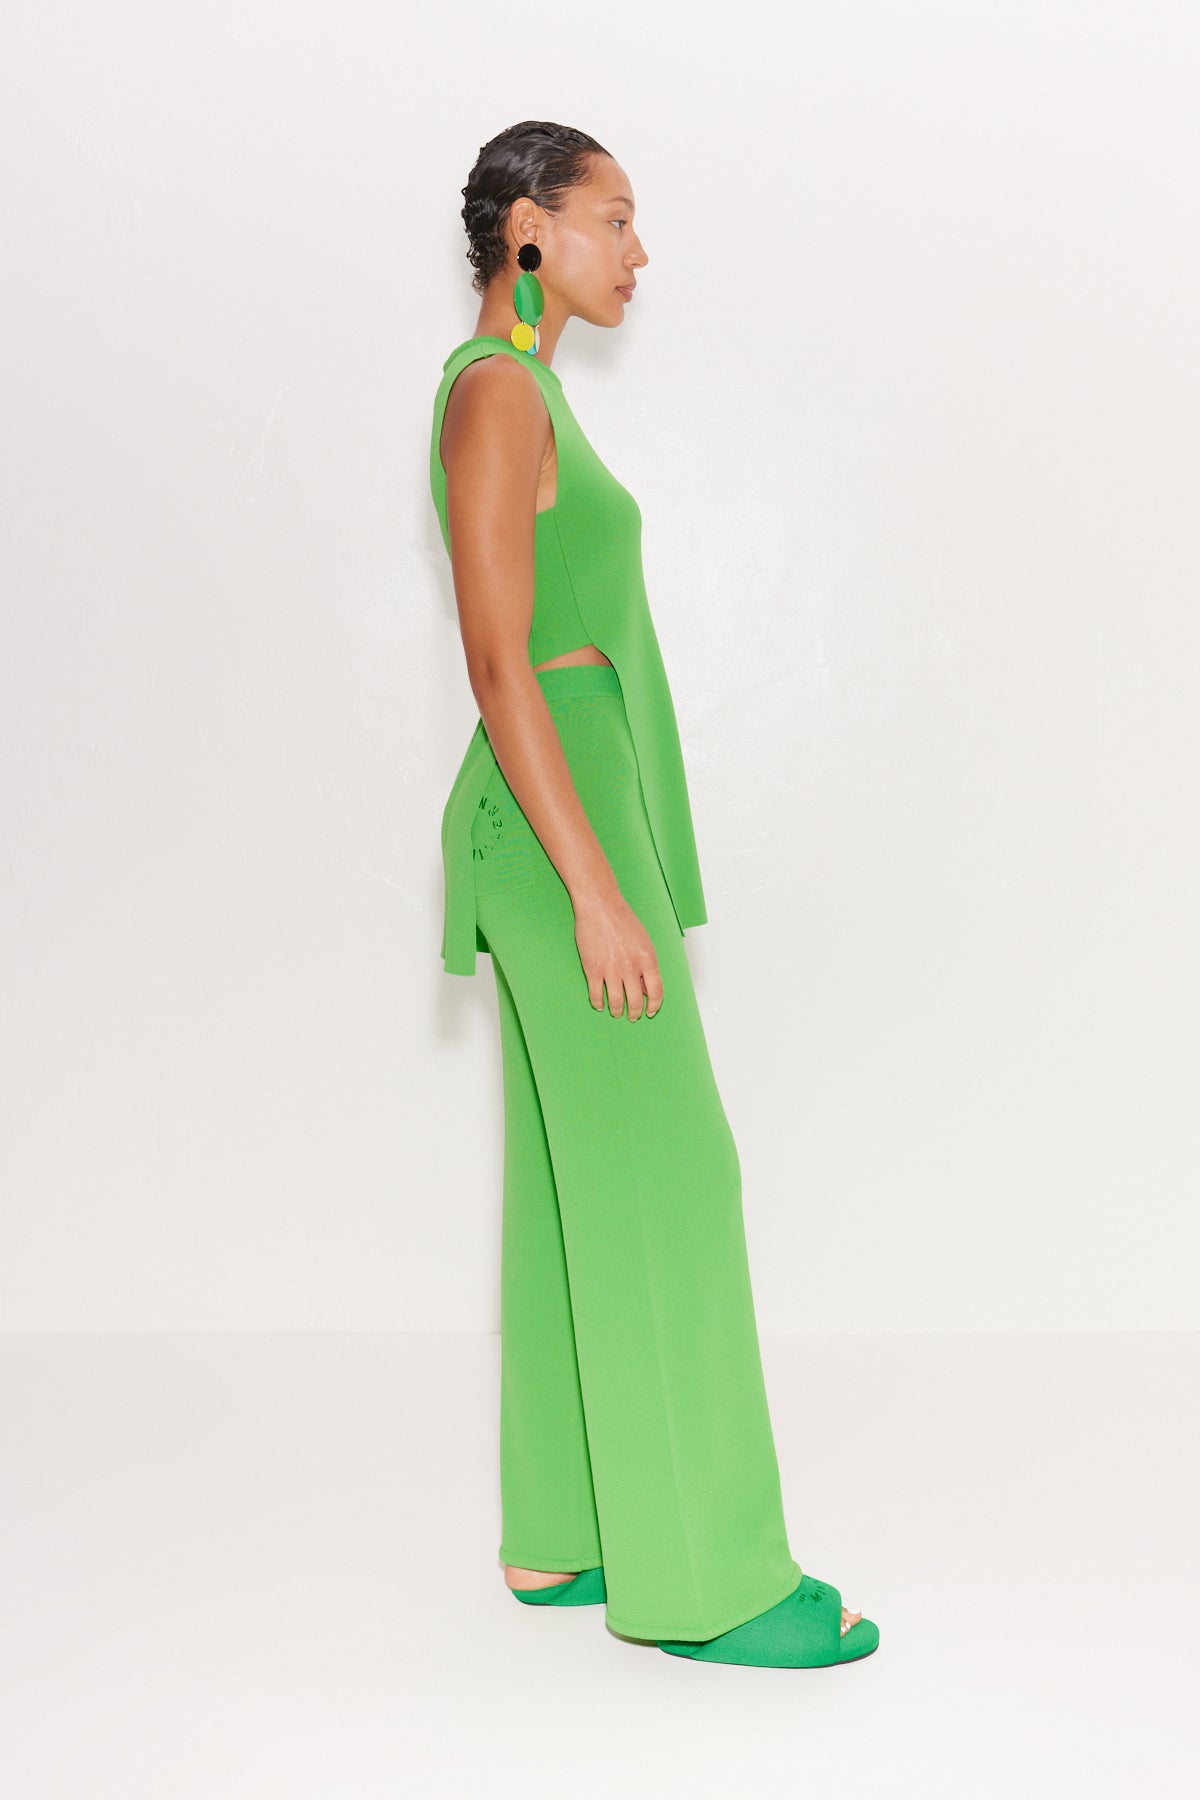 W3241-KNITS-BY-CANOGA-TOP-GUMMY-GREEN-FULL-SIDE-PROFILE